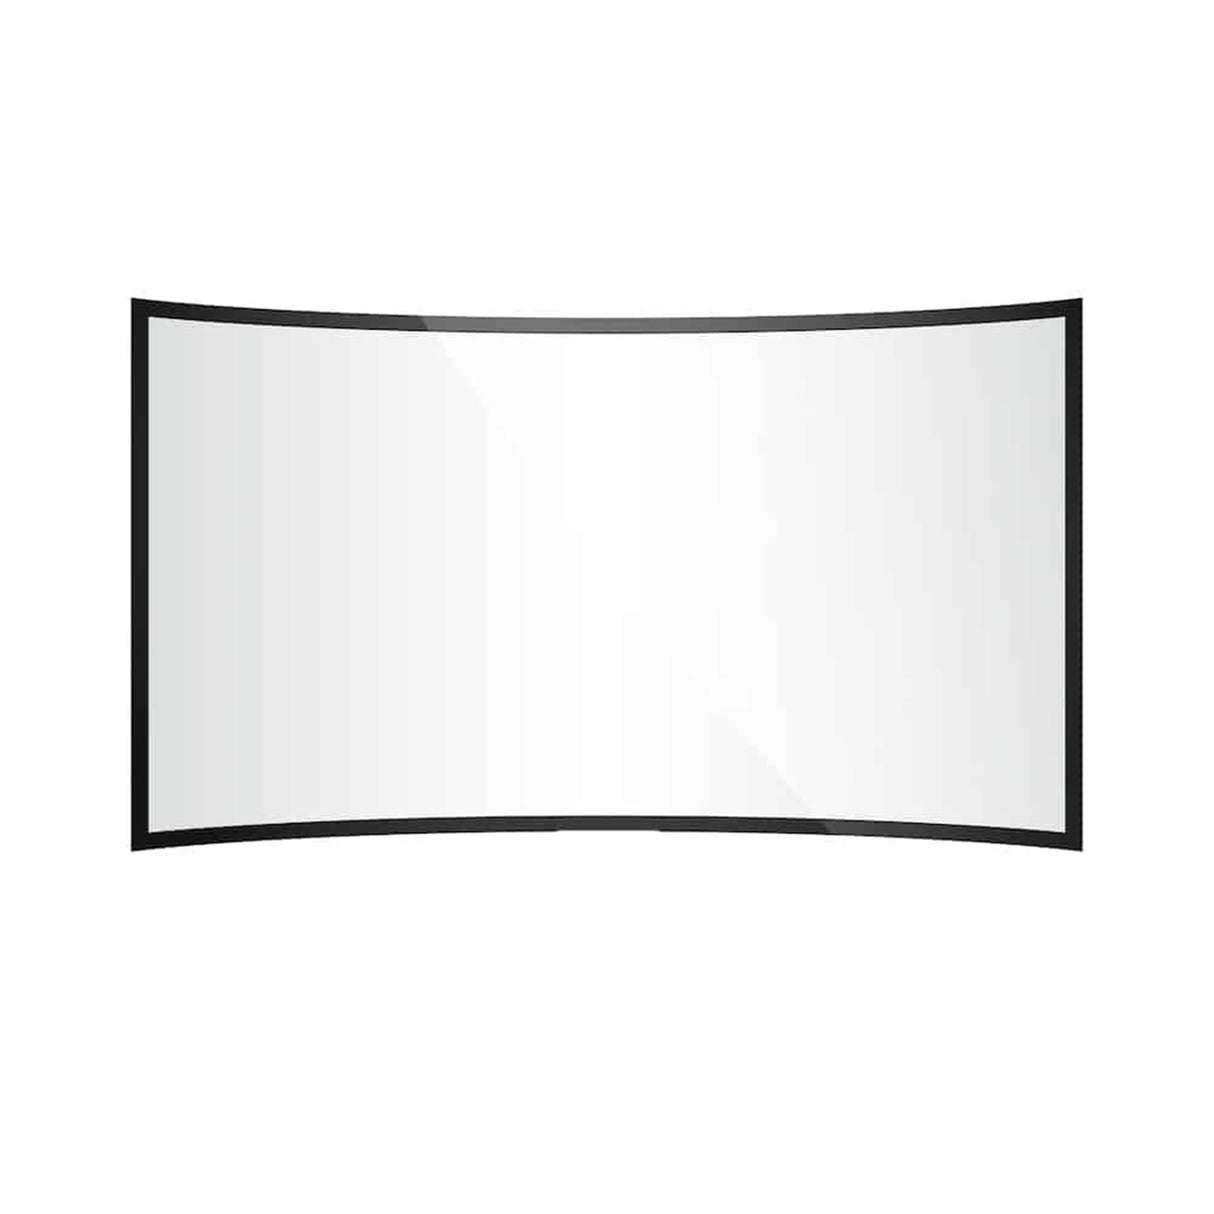 RNT Screen SableFrame Fixed Frame Curve Projection Screen 110'' (16:9) (Matte White)